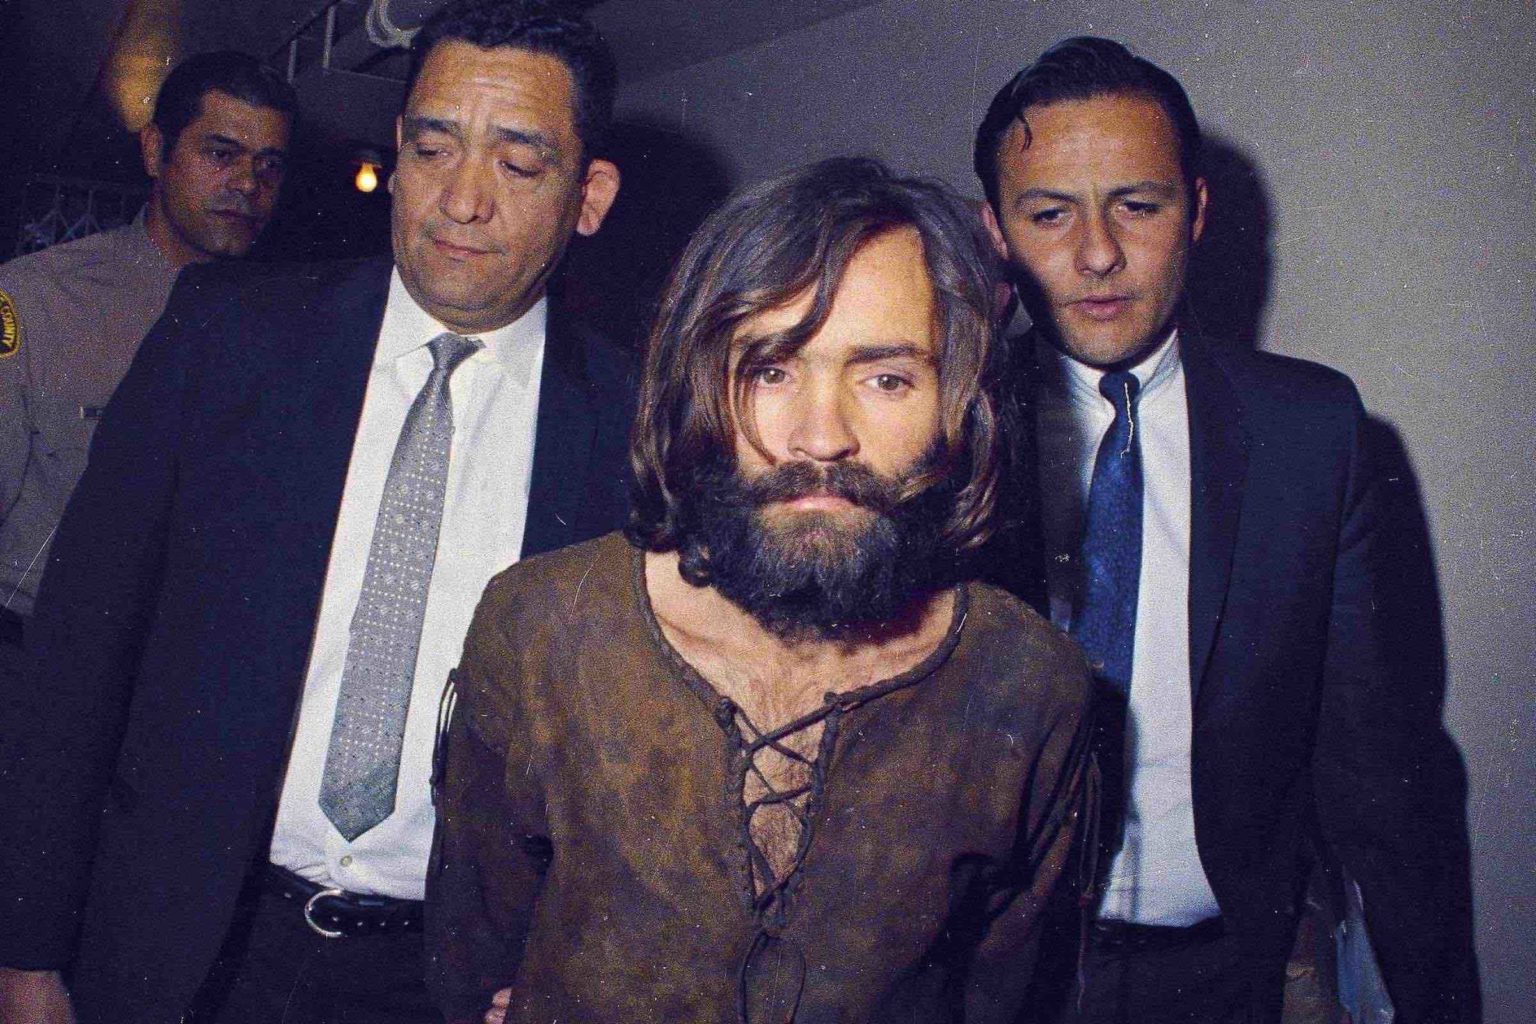 Charles Manson has been infamous since the formation of the Manson family in 1967. Here are the best Charles Manson movies based on his infamous murders.